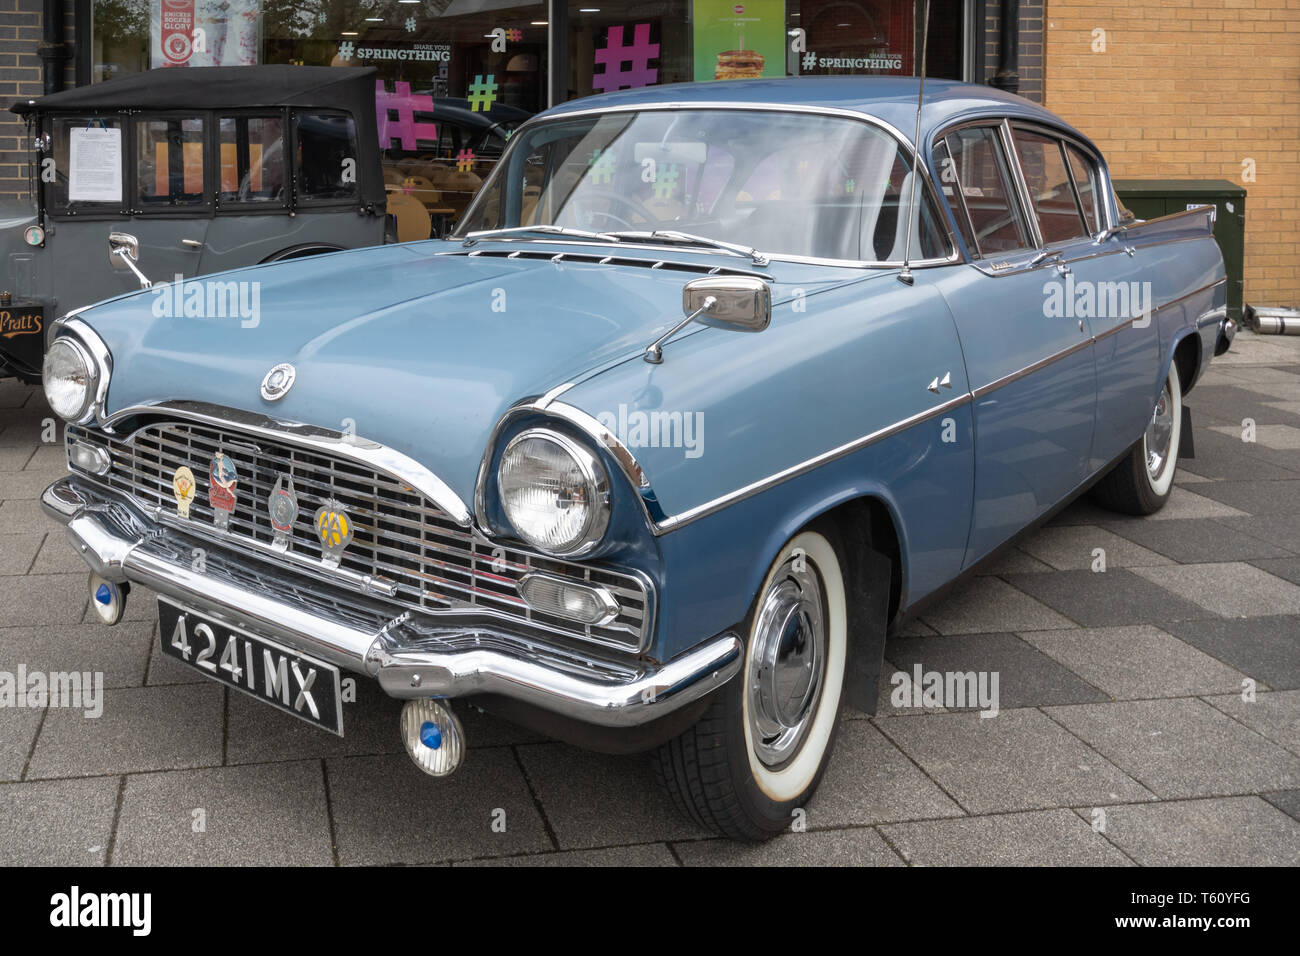 Blue 1962 Vauxhall Cresta vintage car at a classic motor vehicle show in the UK Stock Photo